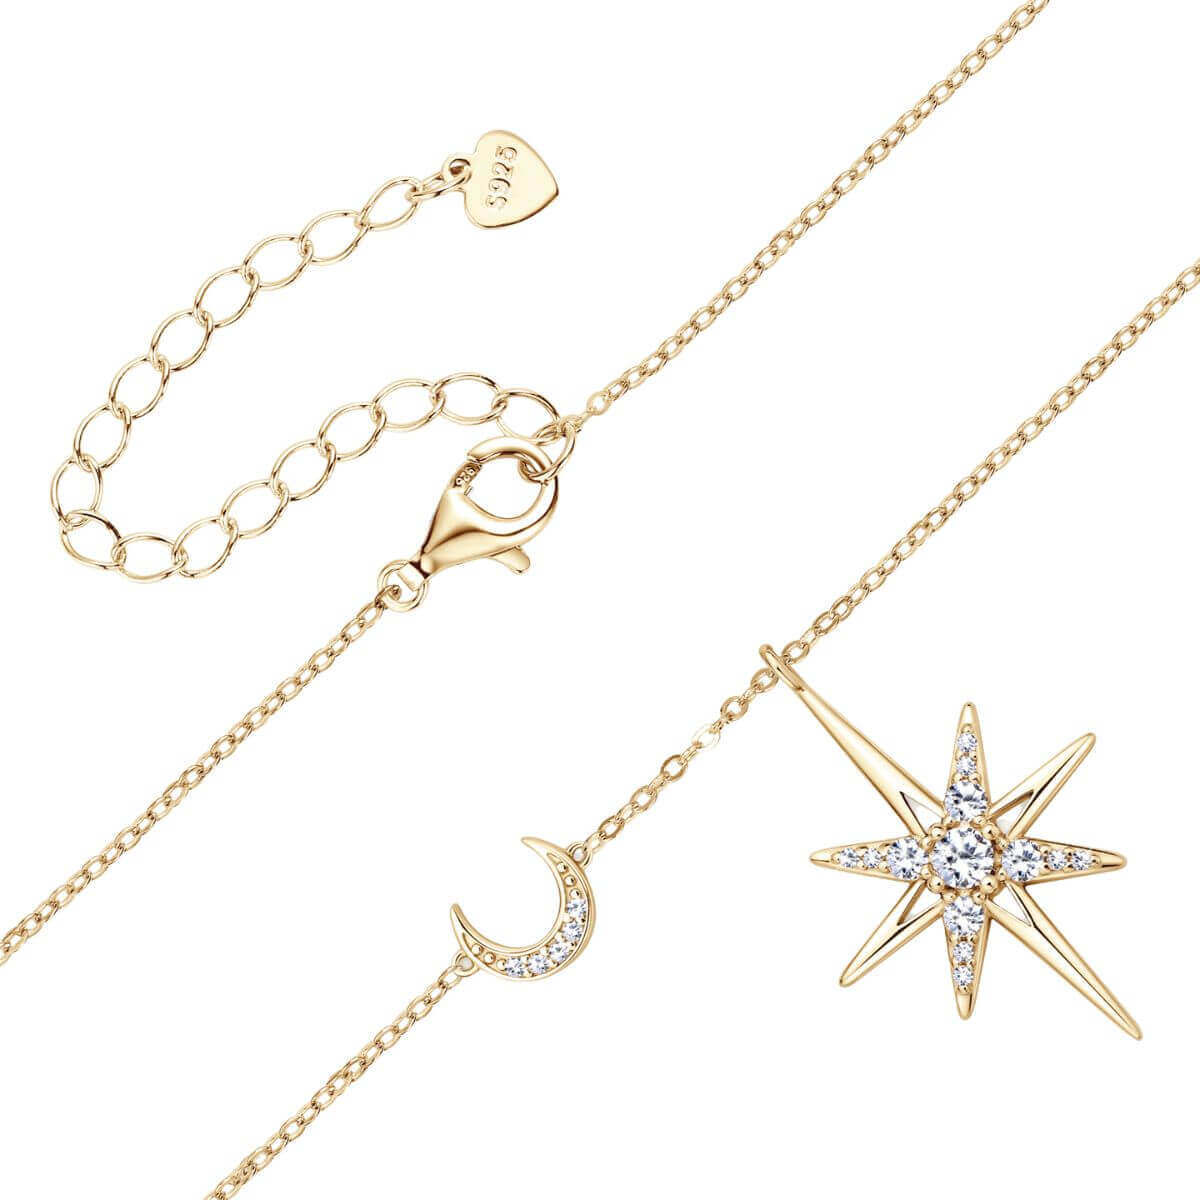 Star And Moon Necklace